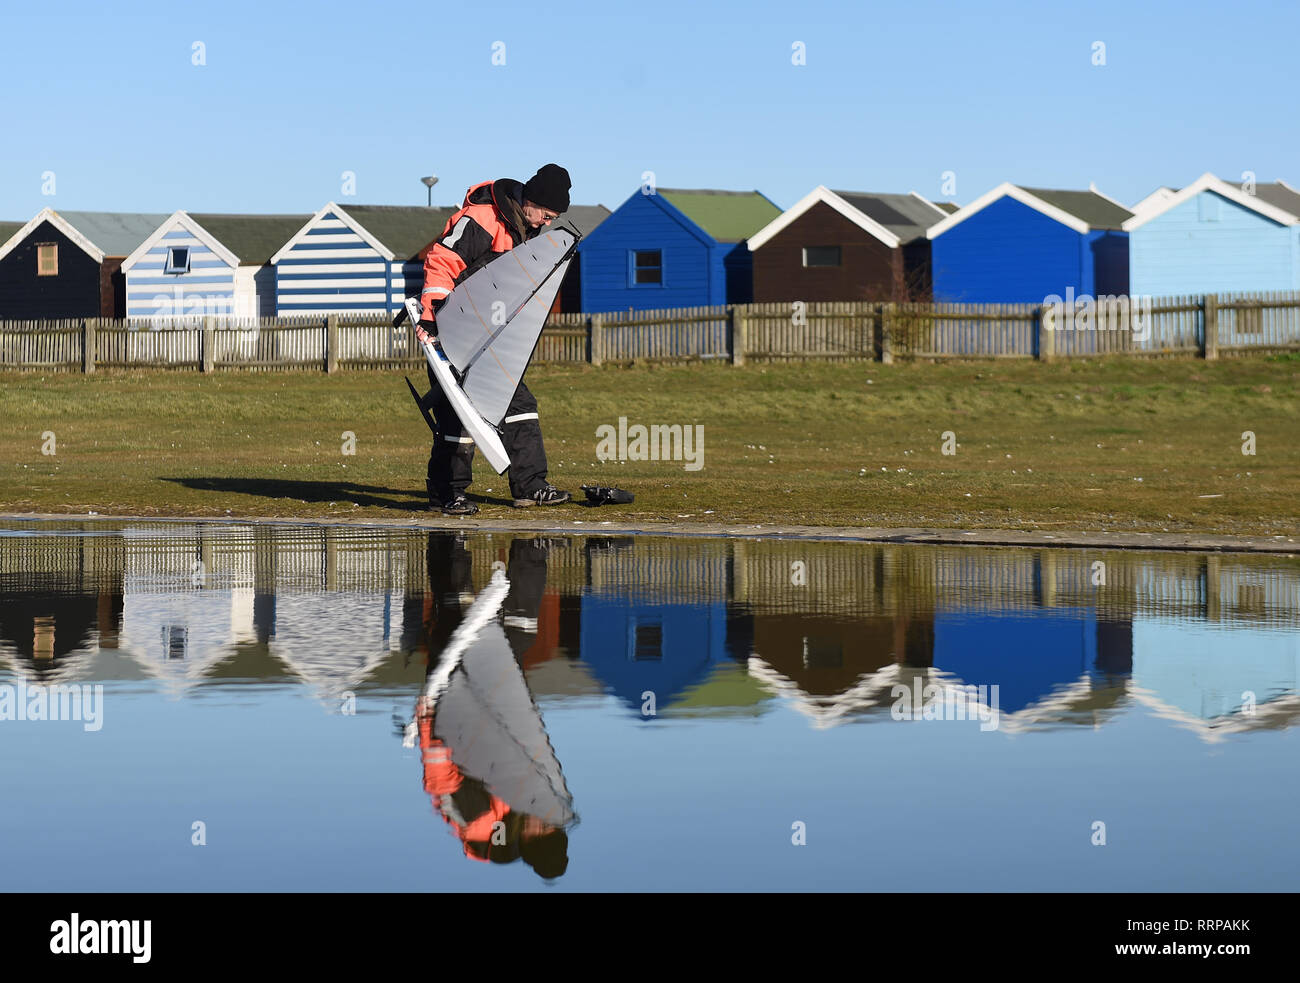 A man retrieves his model yacht from the boating lake at Southwold in Suffolk, as Britain could experience more record-breaking temperatures this week. PRESS ASSOCIATION The UK has experienced its warmest winter day since records began with temperatures hitting 20.8C in Porthmadog, Gwynedd, west Wales on Tuesday as Britain could experience more record-breaking temperatures this week. See PA story WEATHER Warm. Photo credit should read: Joe Giddens/PA Wire Stock Photo